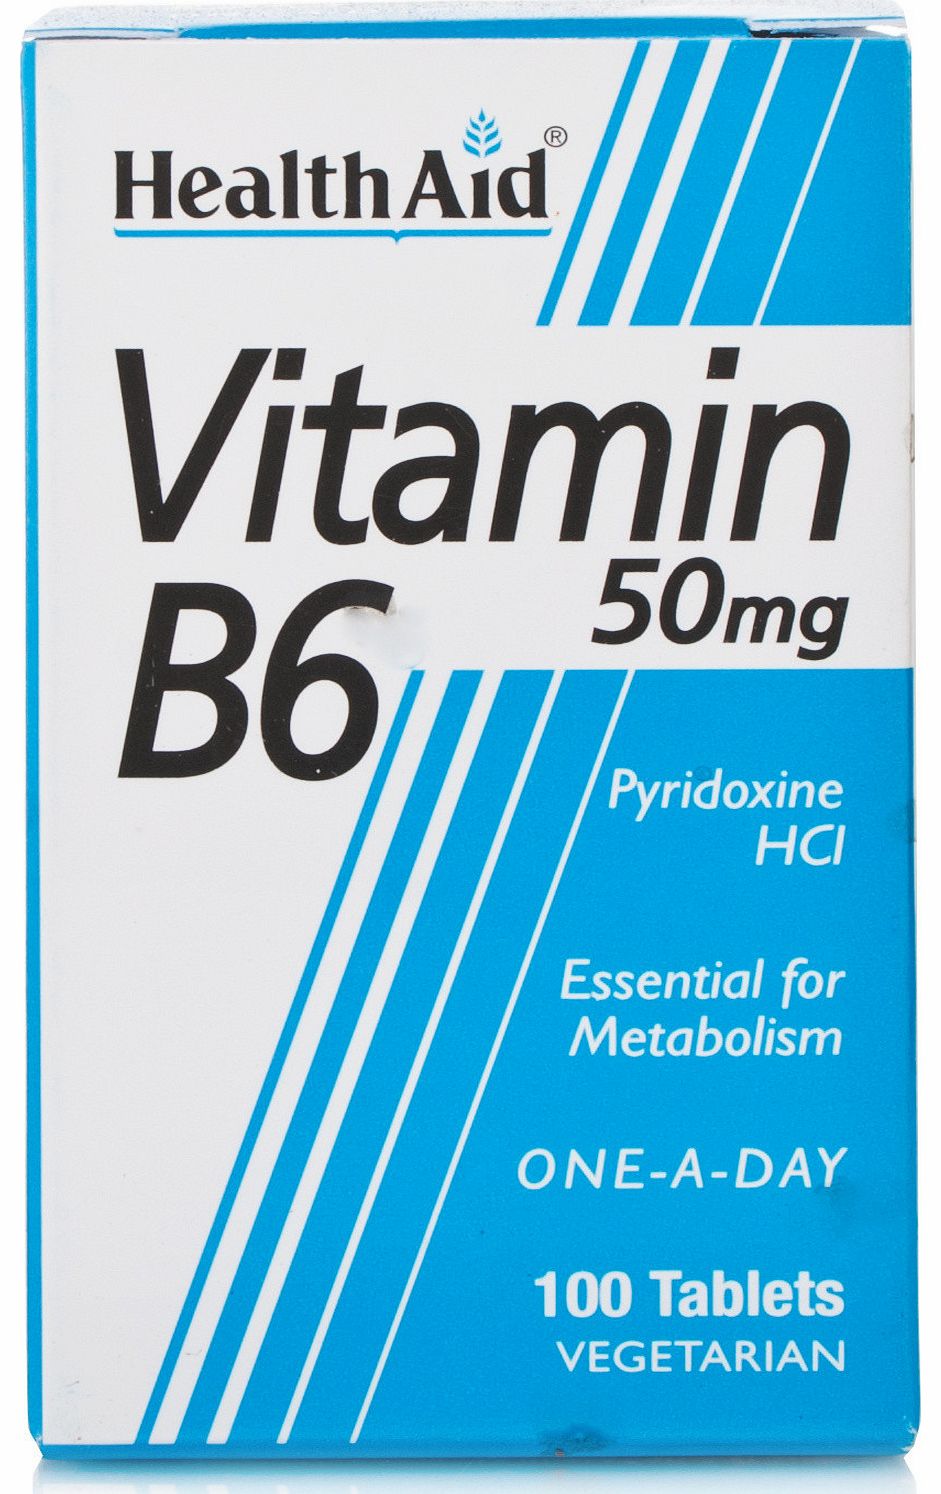 Vitamin B6 50mg Tabs provide your body with essential B vitamins for a healthier metabolism and appearance. The B vitamins in the supplement are consistent of a water soluble group which unite with B Complex and create a range of biochemical reaction